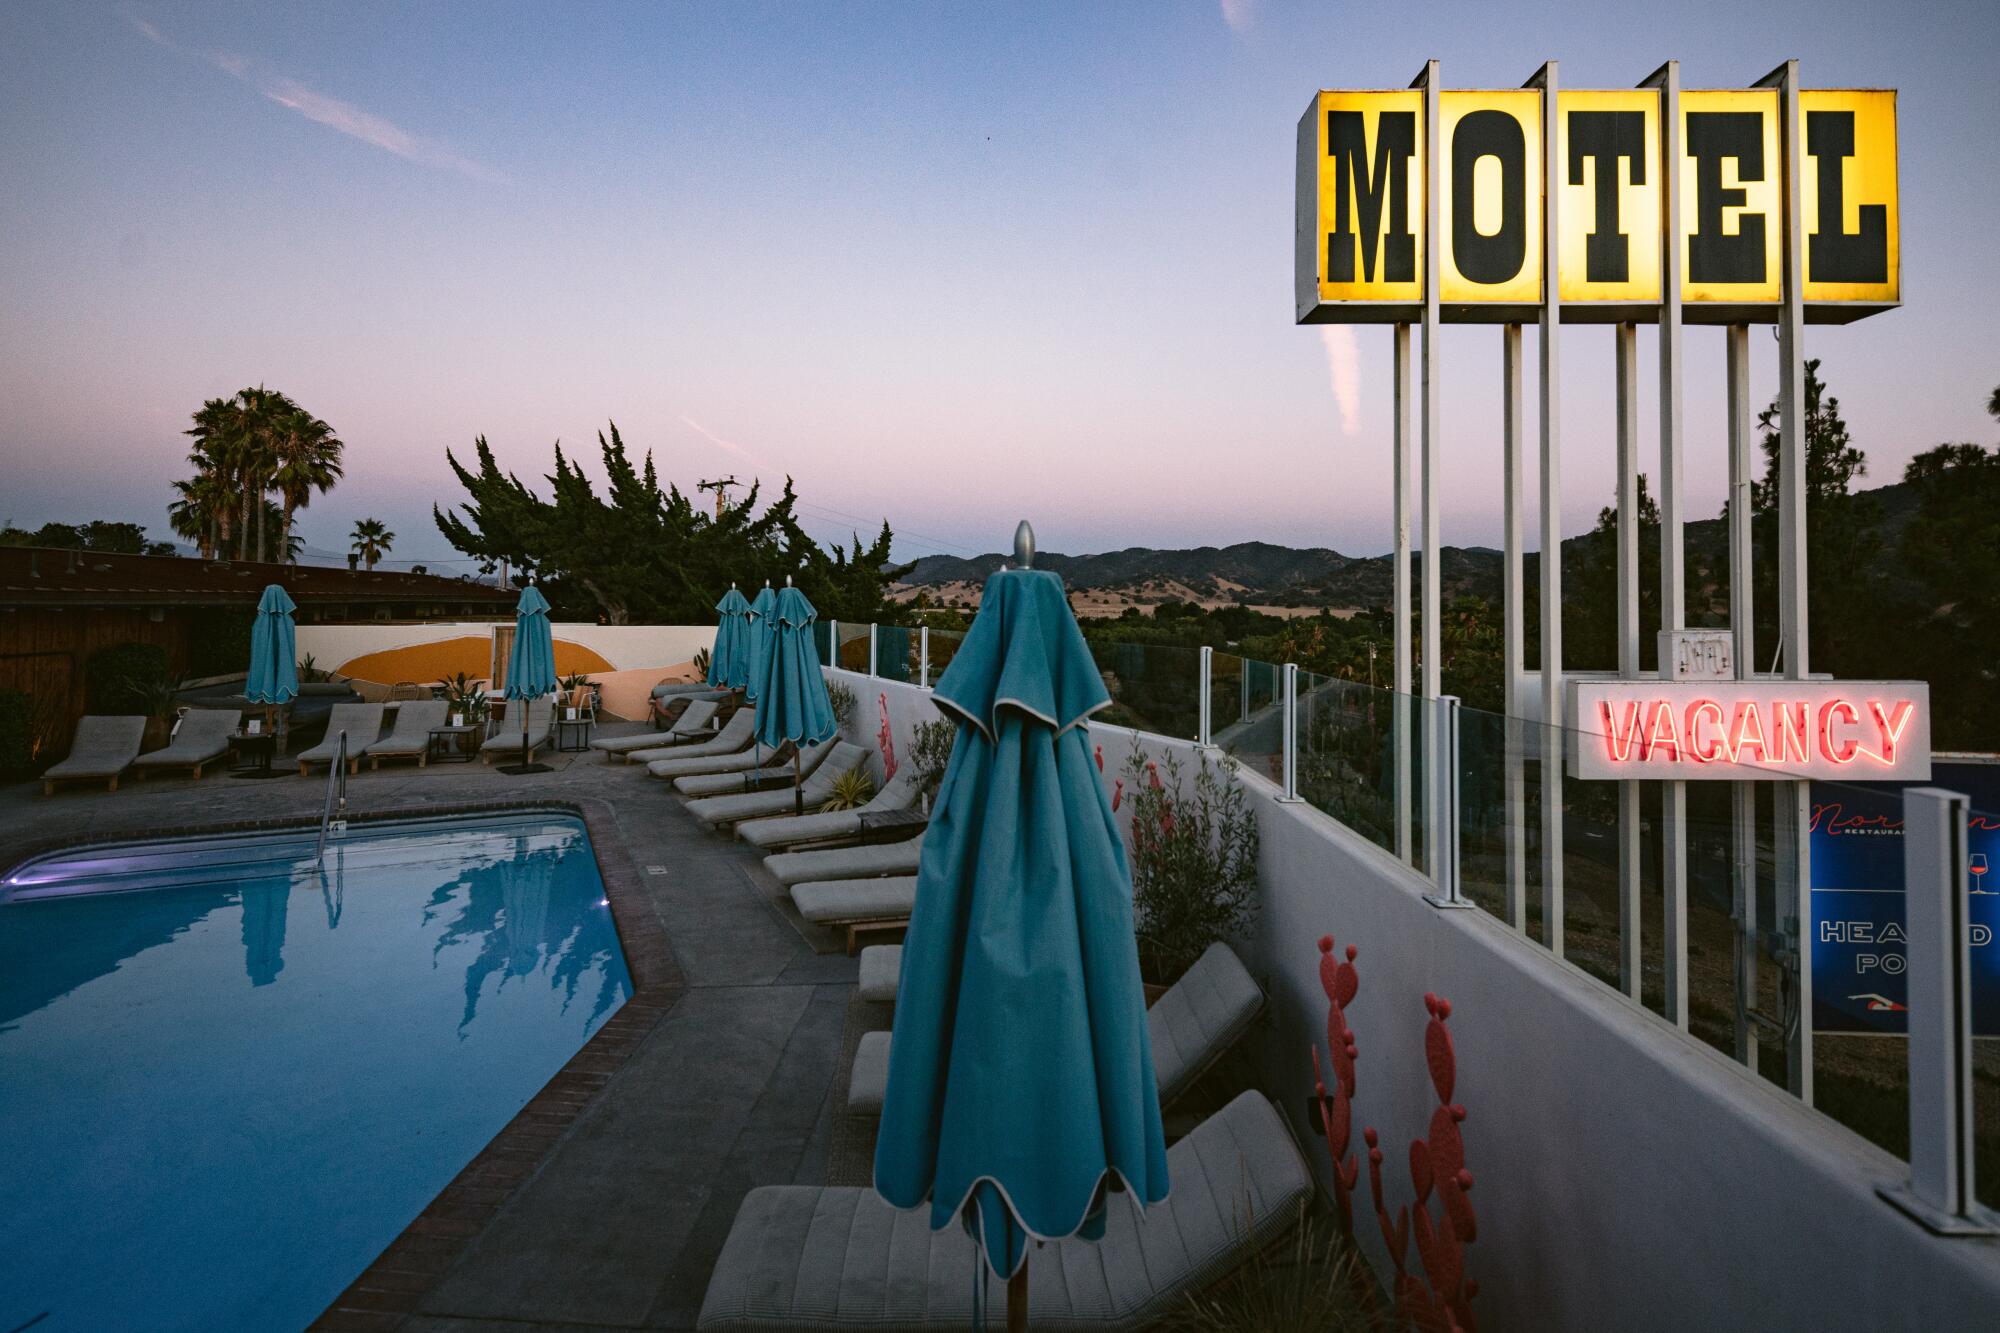 A yellow motel sign and a placid pool at dusk.